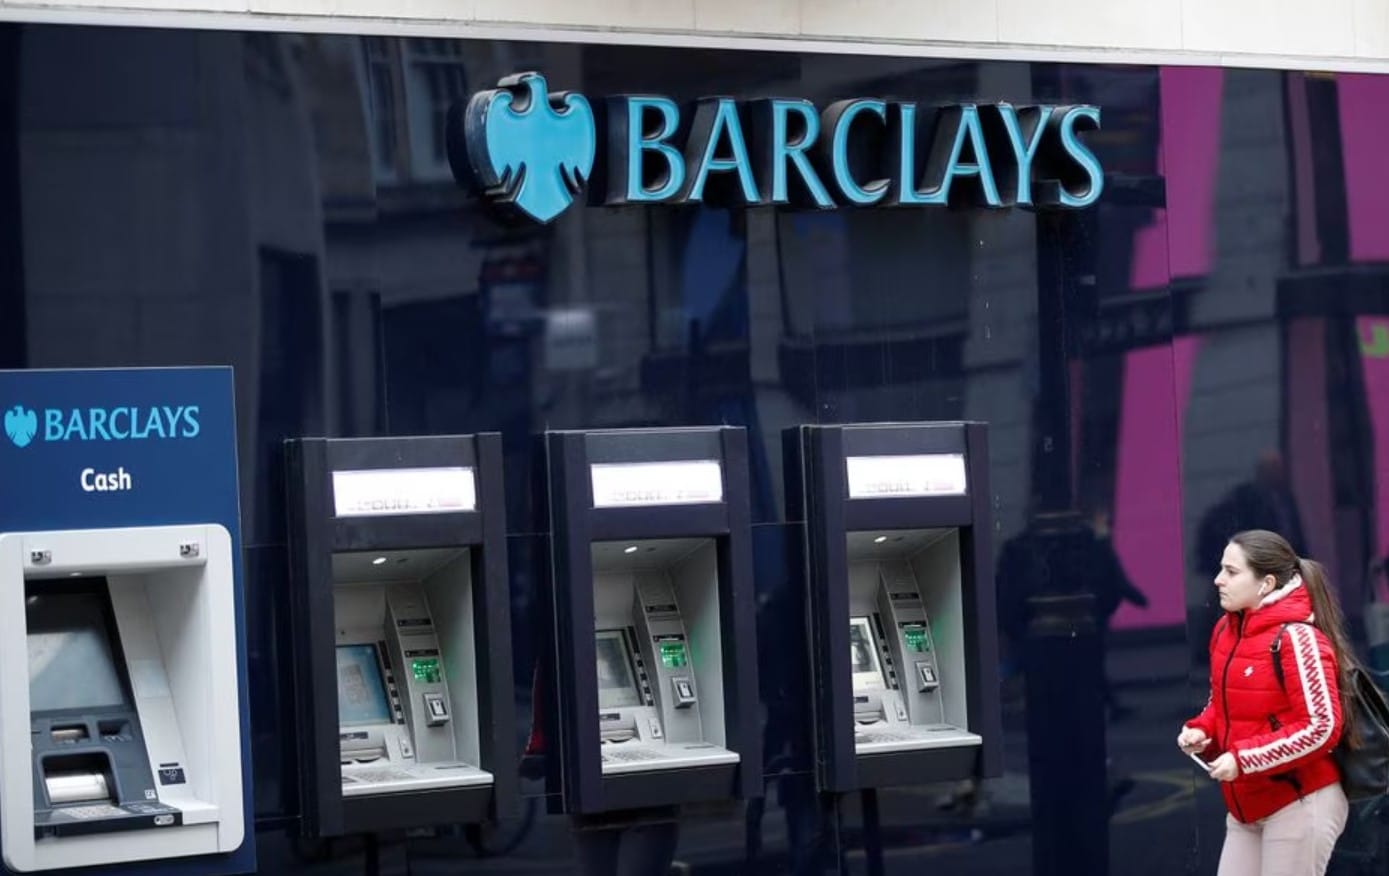 Barclays announces £750 million share buyback amid earnings upgrade